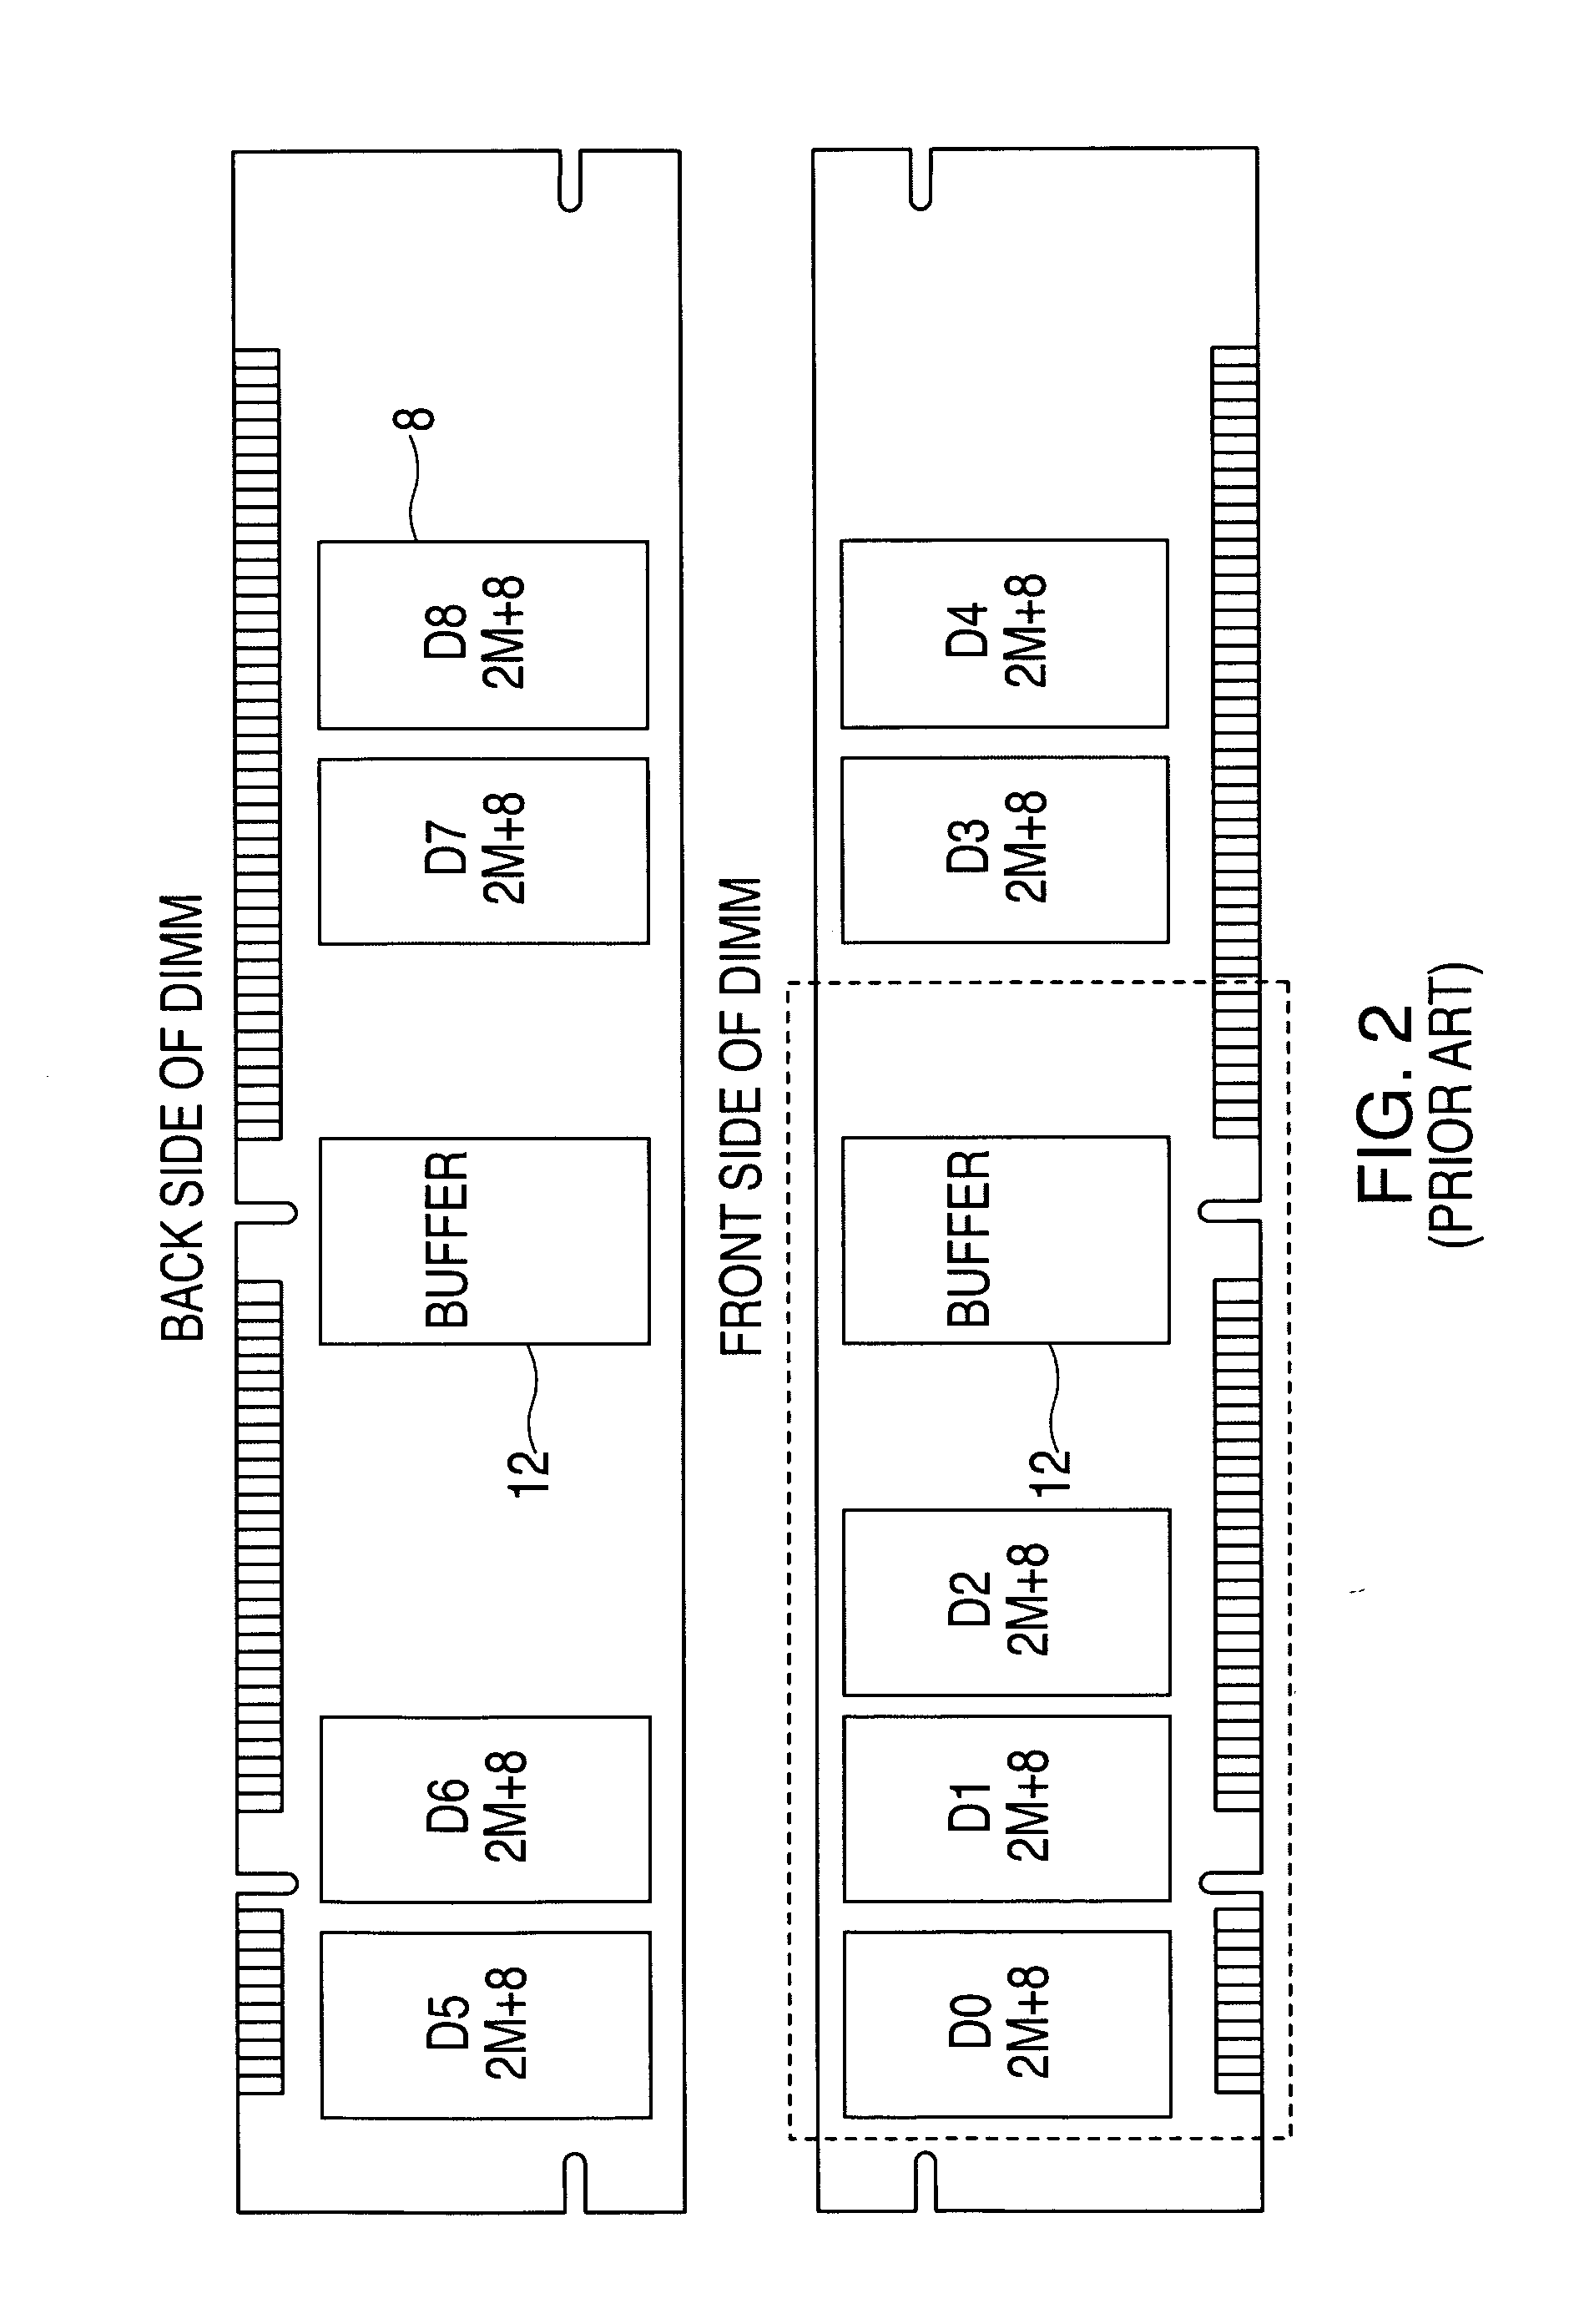 System, method and storage medium for providing a service interface to a memory system